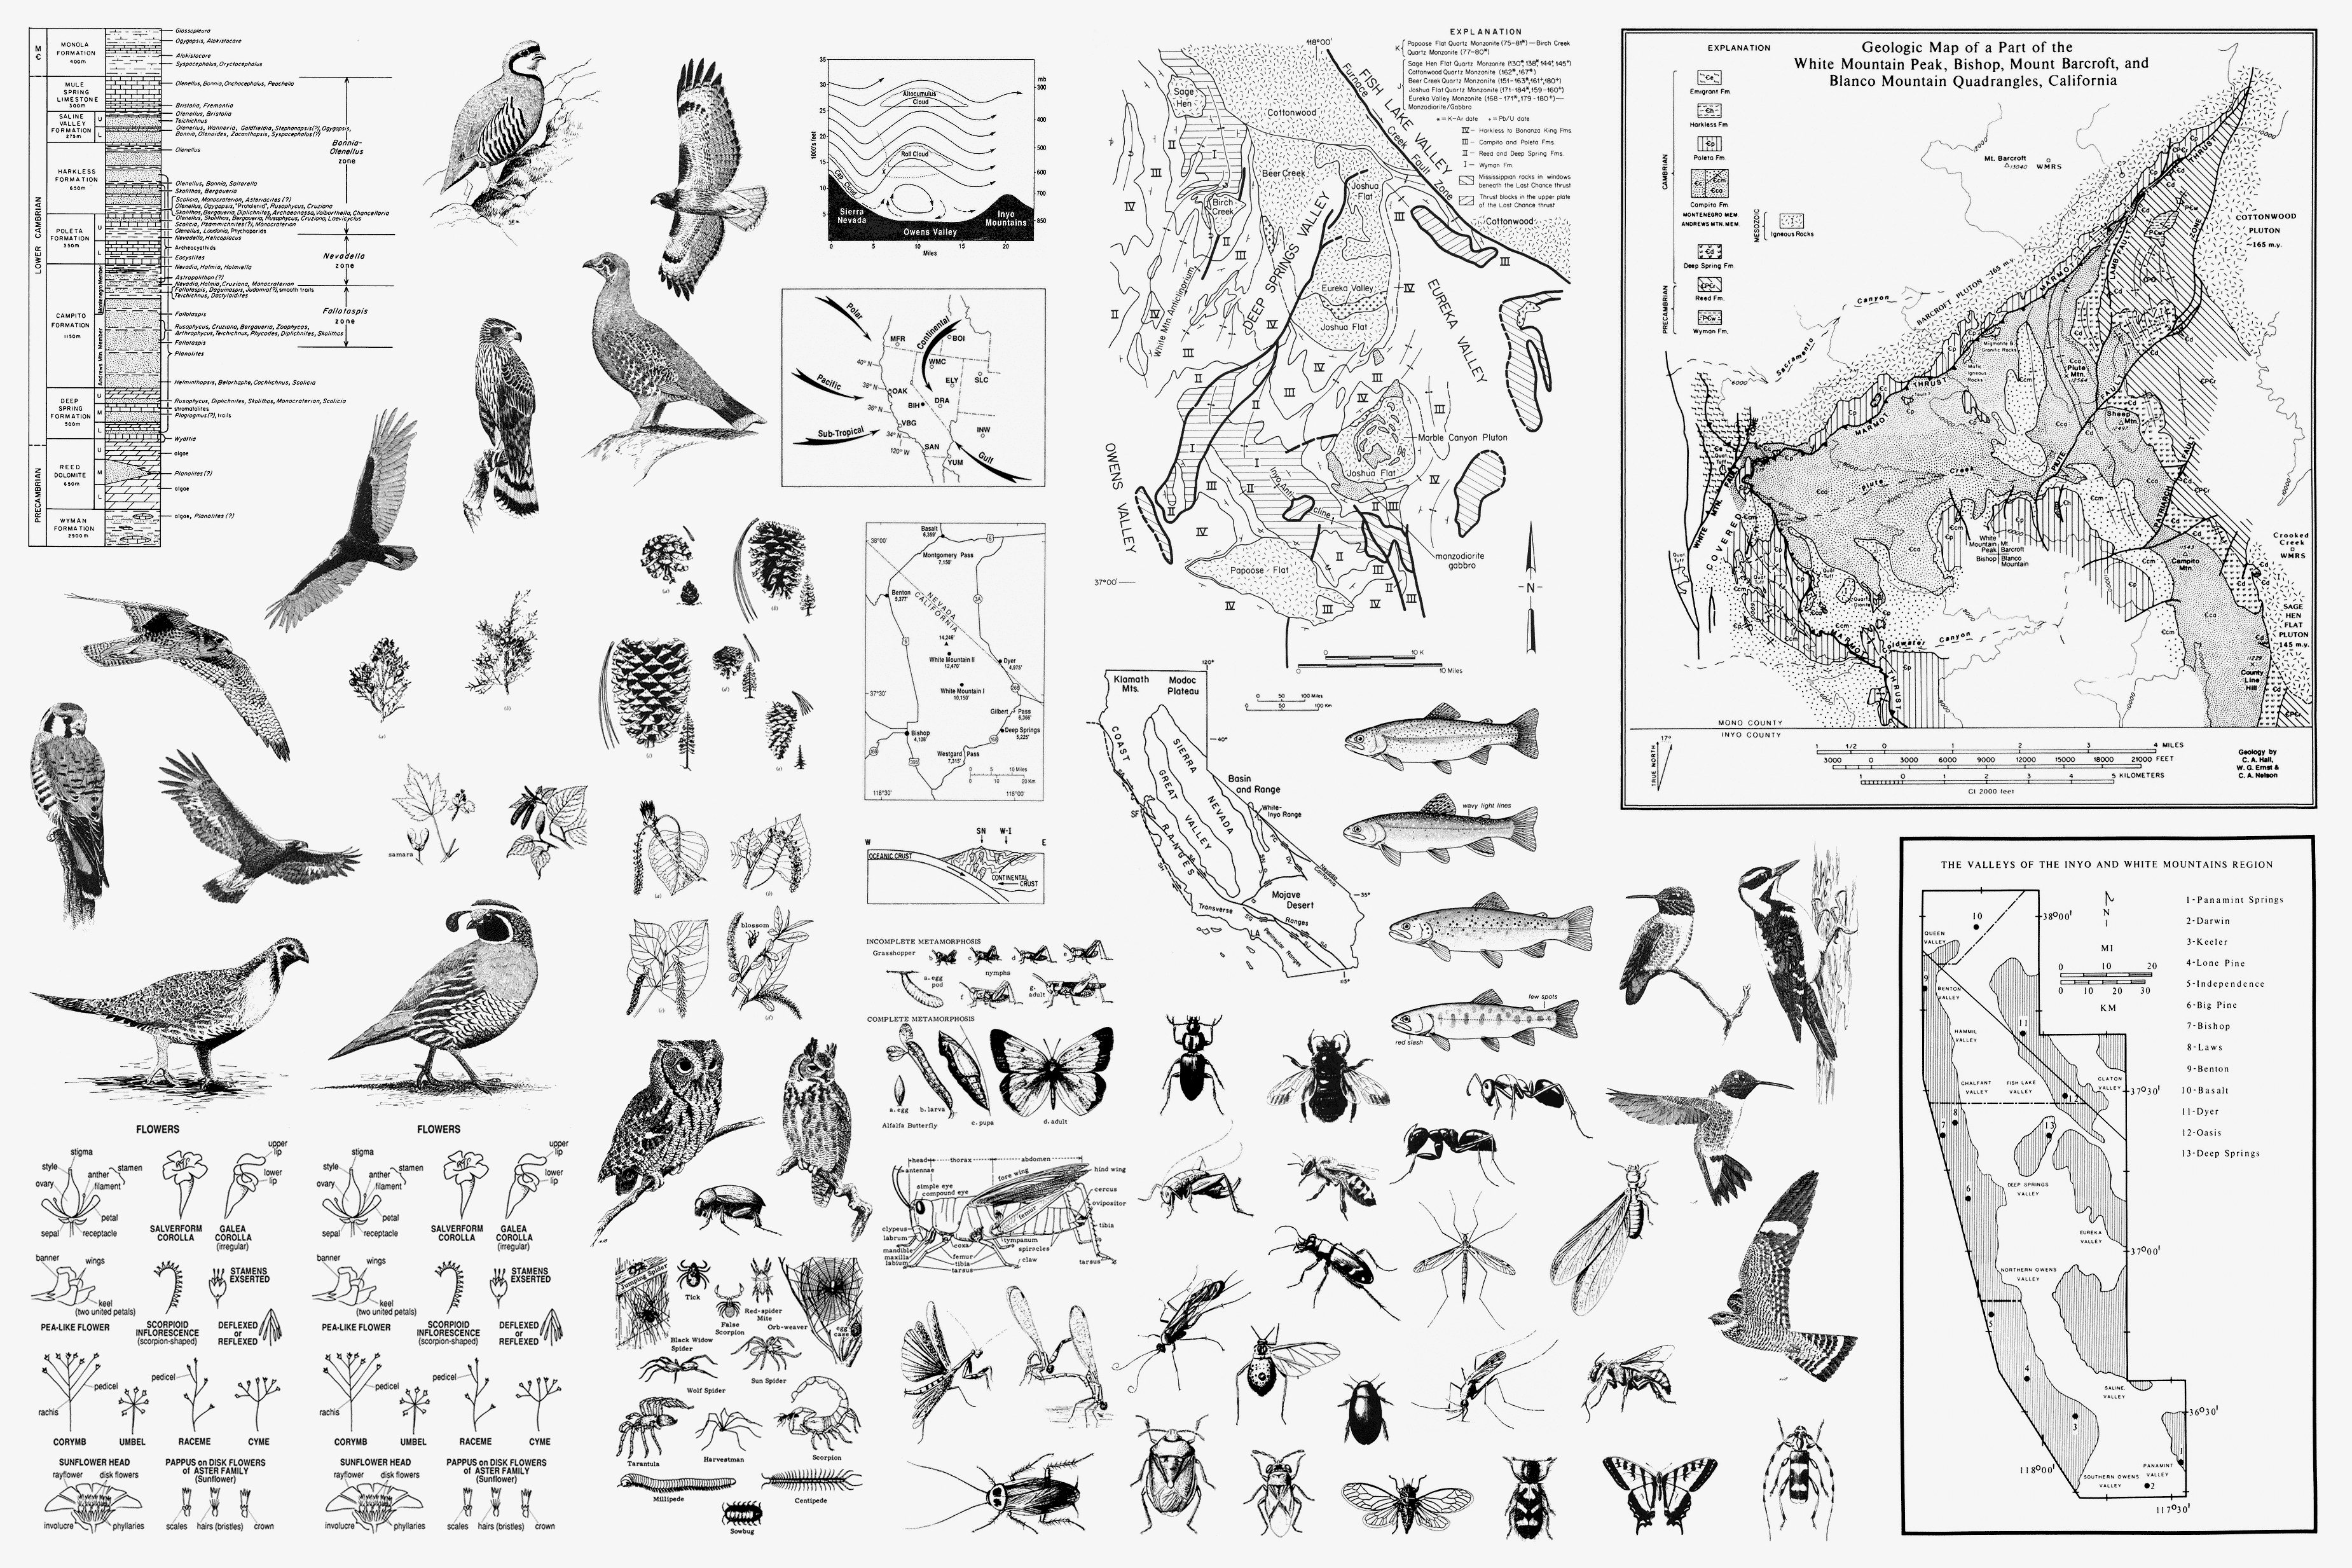 Natural History of the White-Inyo Range · Collage of clippings